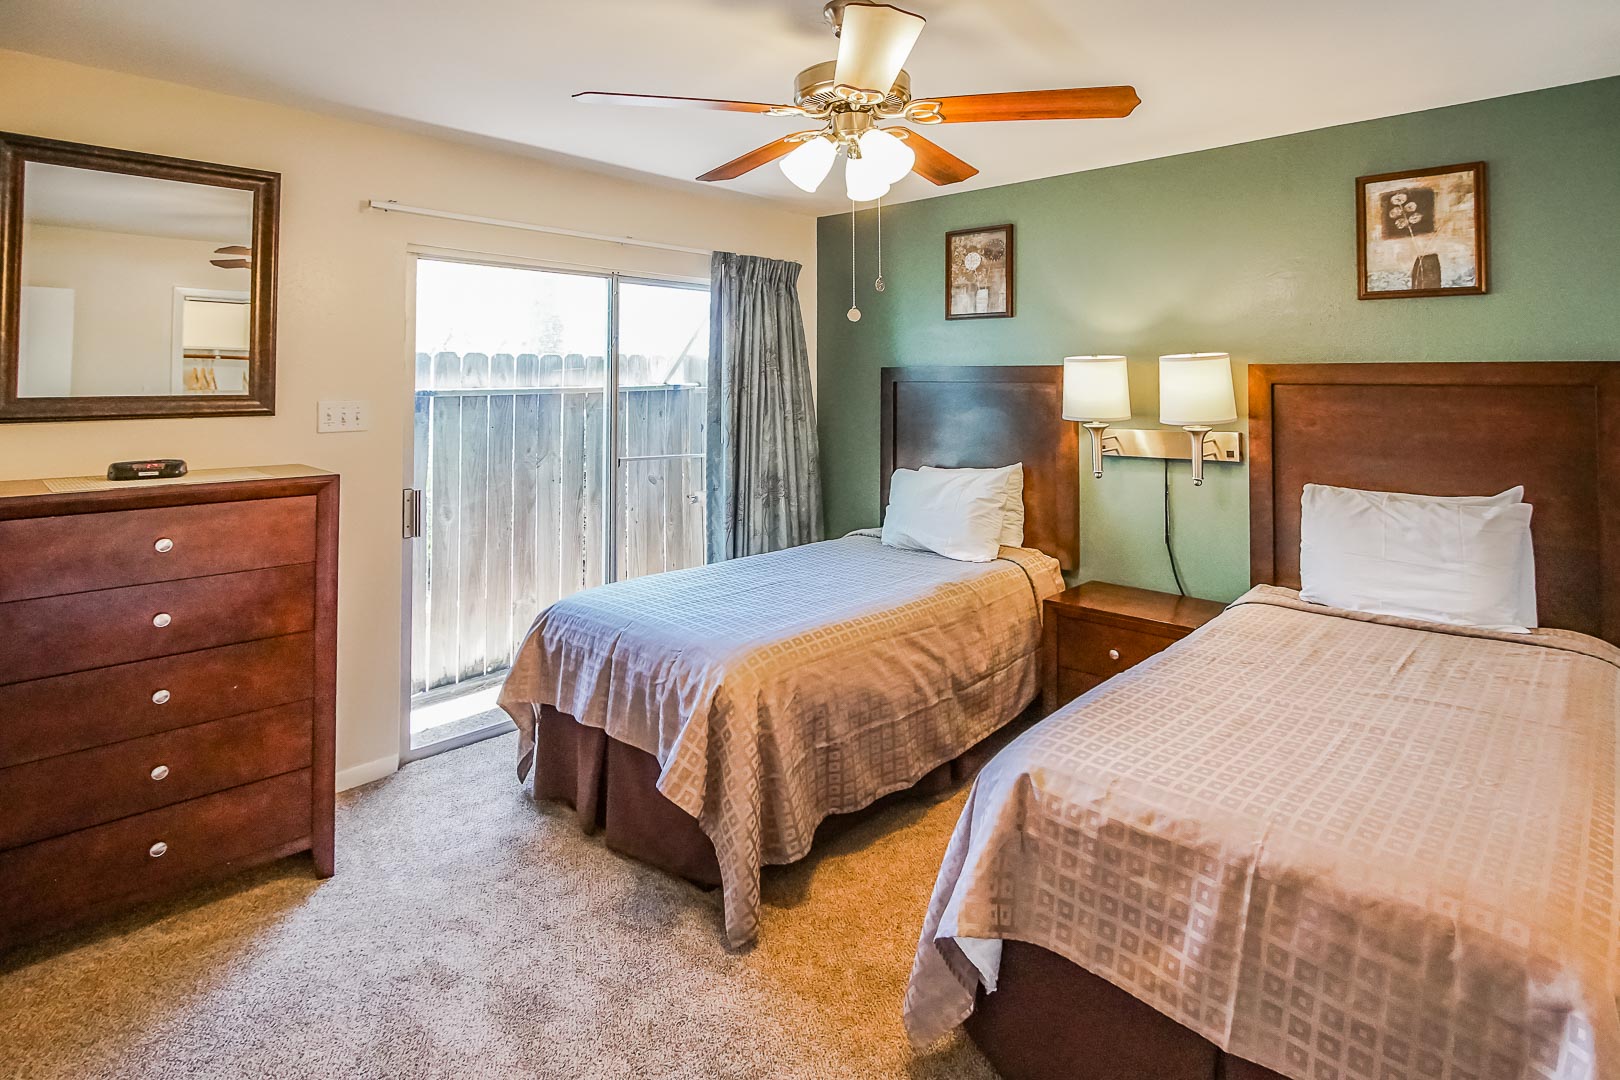 A two bedroom with double beds at VRI's Puente Vista in Texas.